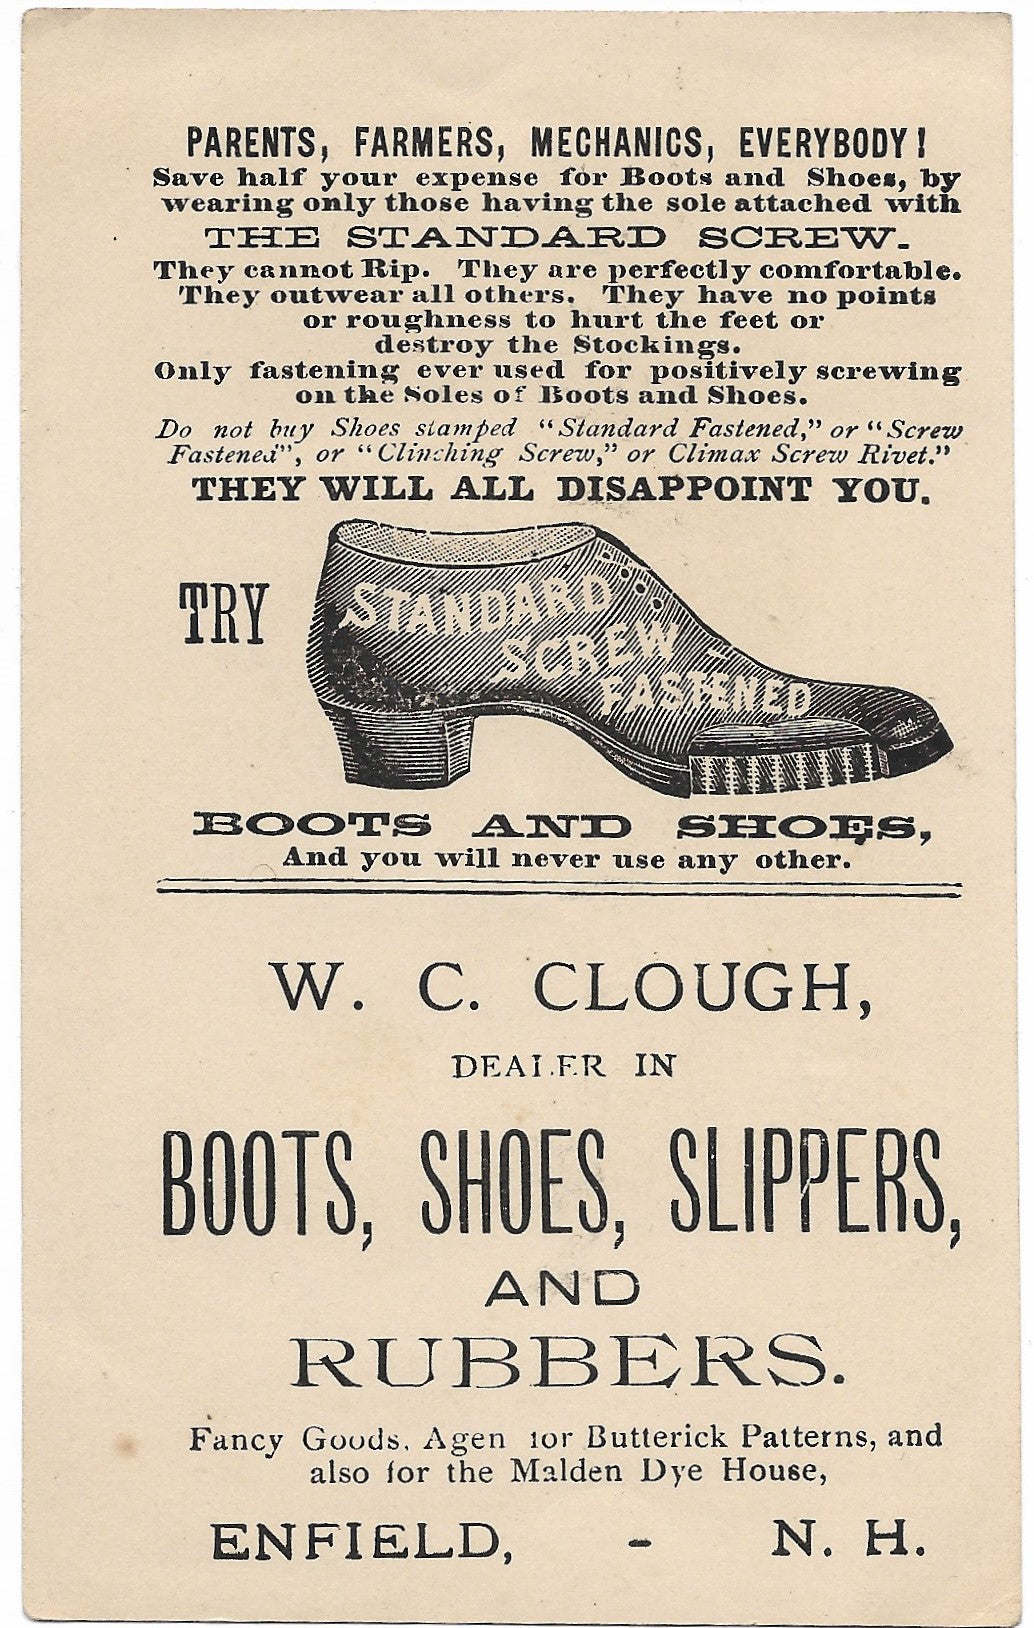 W.C. Clough Boots, Shoes, Slippers, & Rubbers Antique Trade Card, Enfield, NH - 3.25" x 5.5"